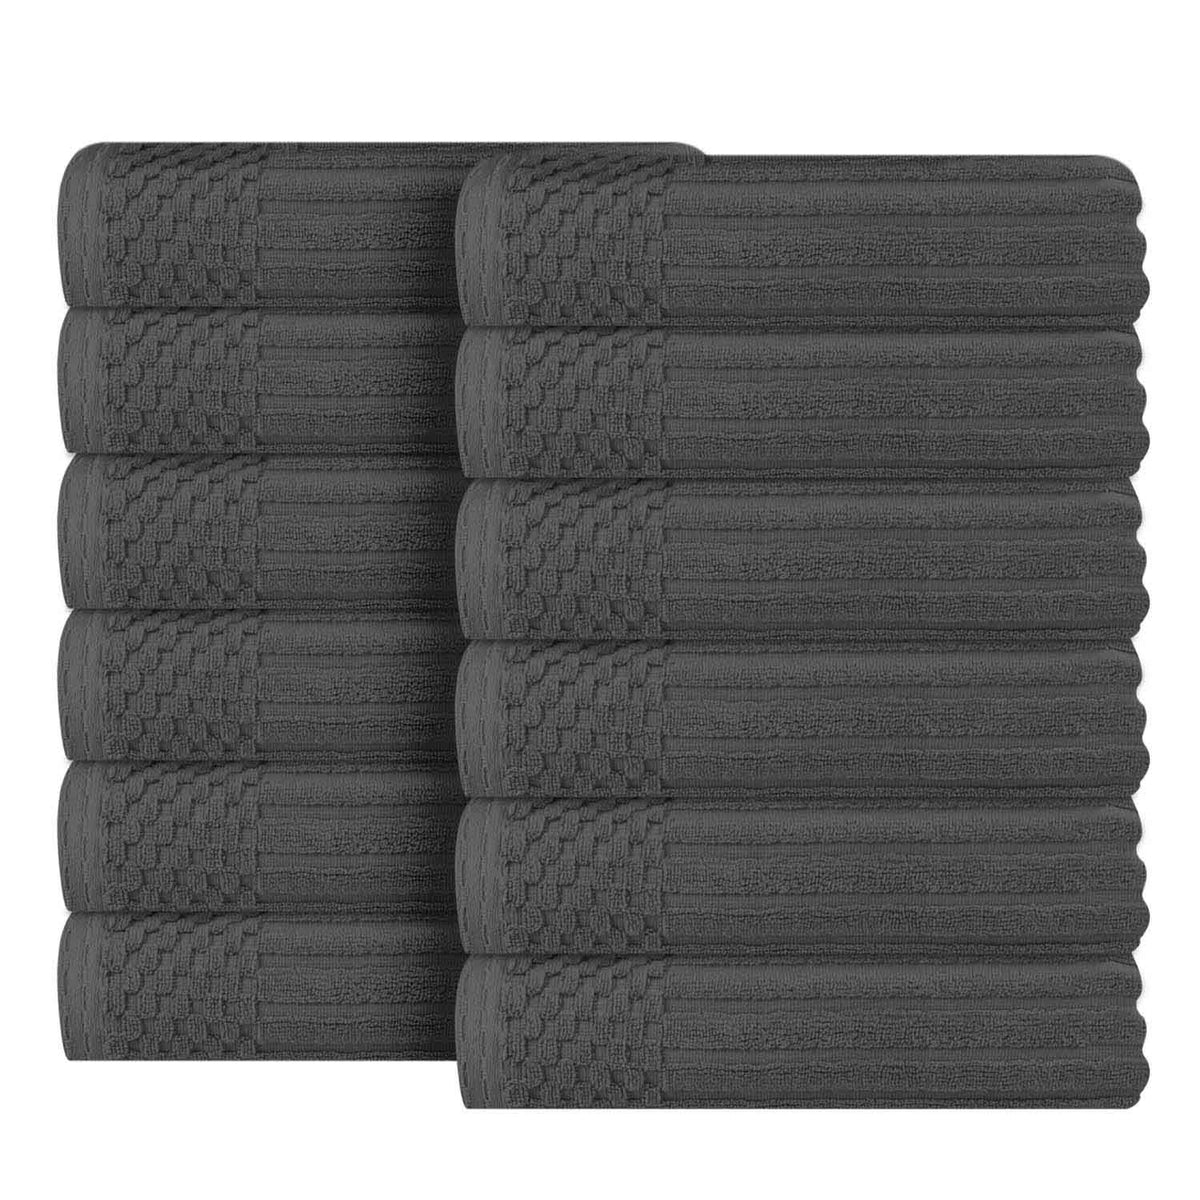 Soho Ribbed Cotton Absorbent Face Towel / Washcloth Set of 12 - Charcoal